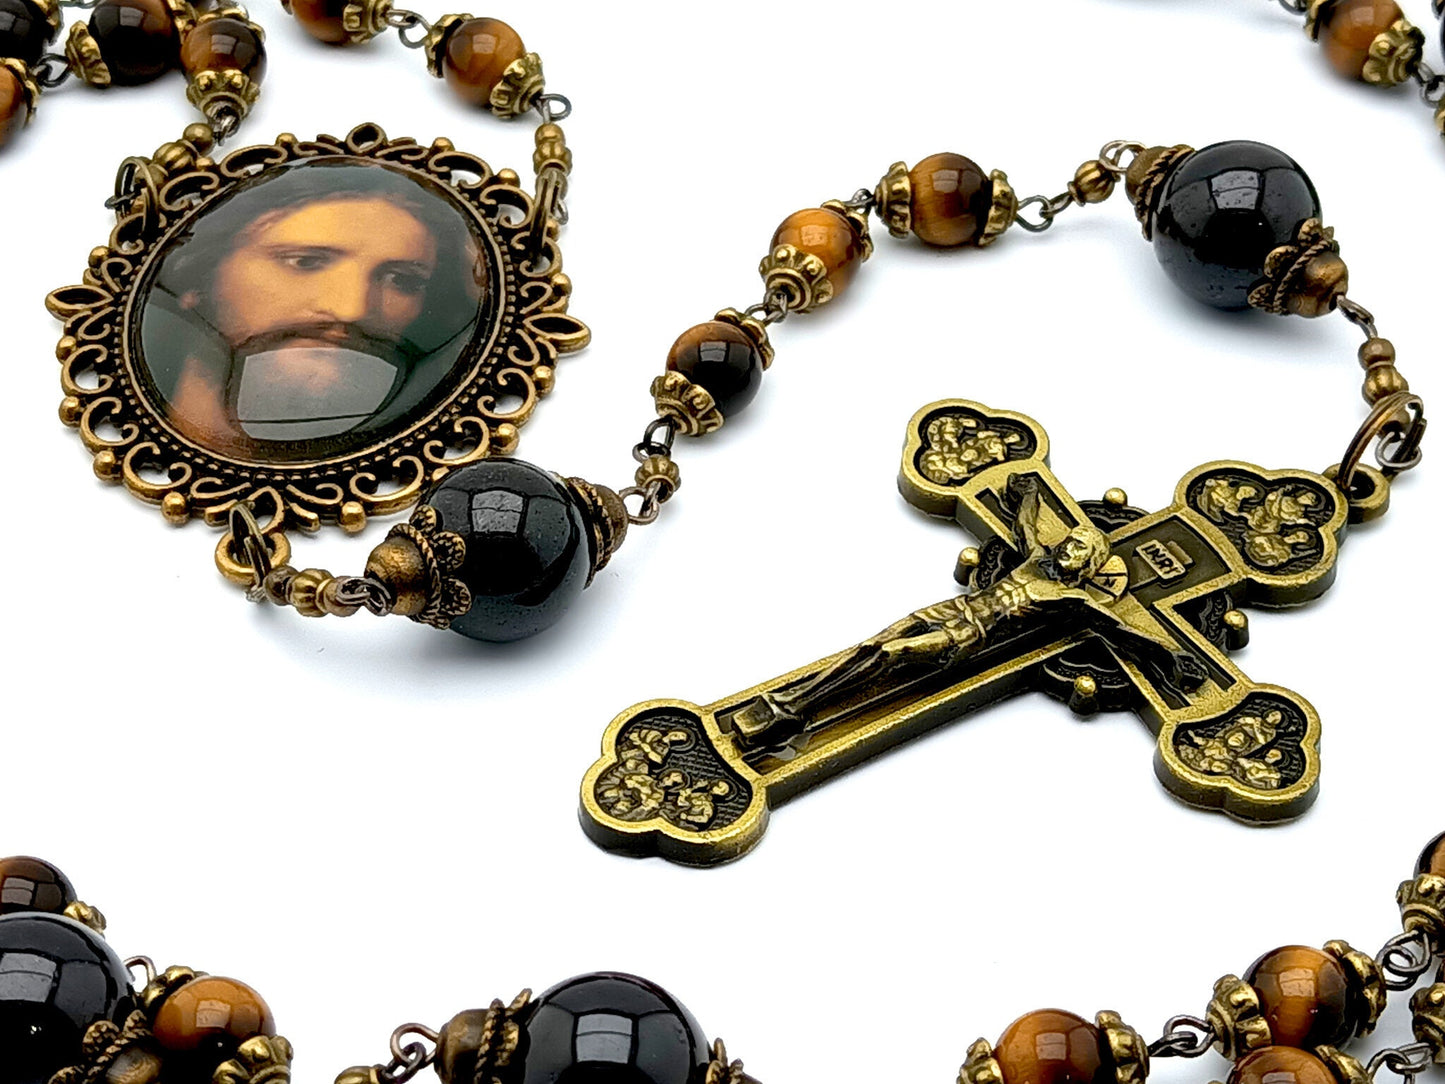 Holy face of Jesus unique rosary beads with tigers eye and garnet gemstone beads, bronze twelve apostles crucifix and Holy face centre medal.